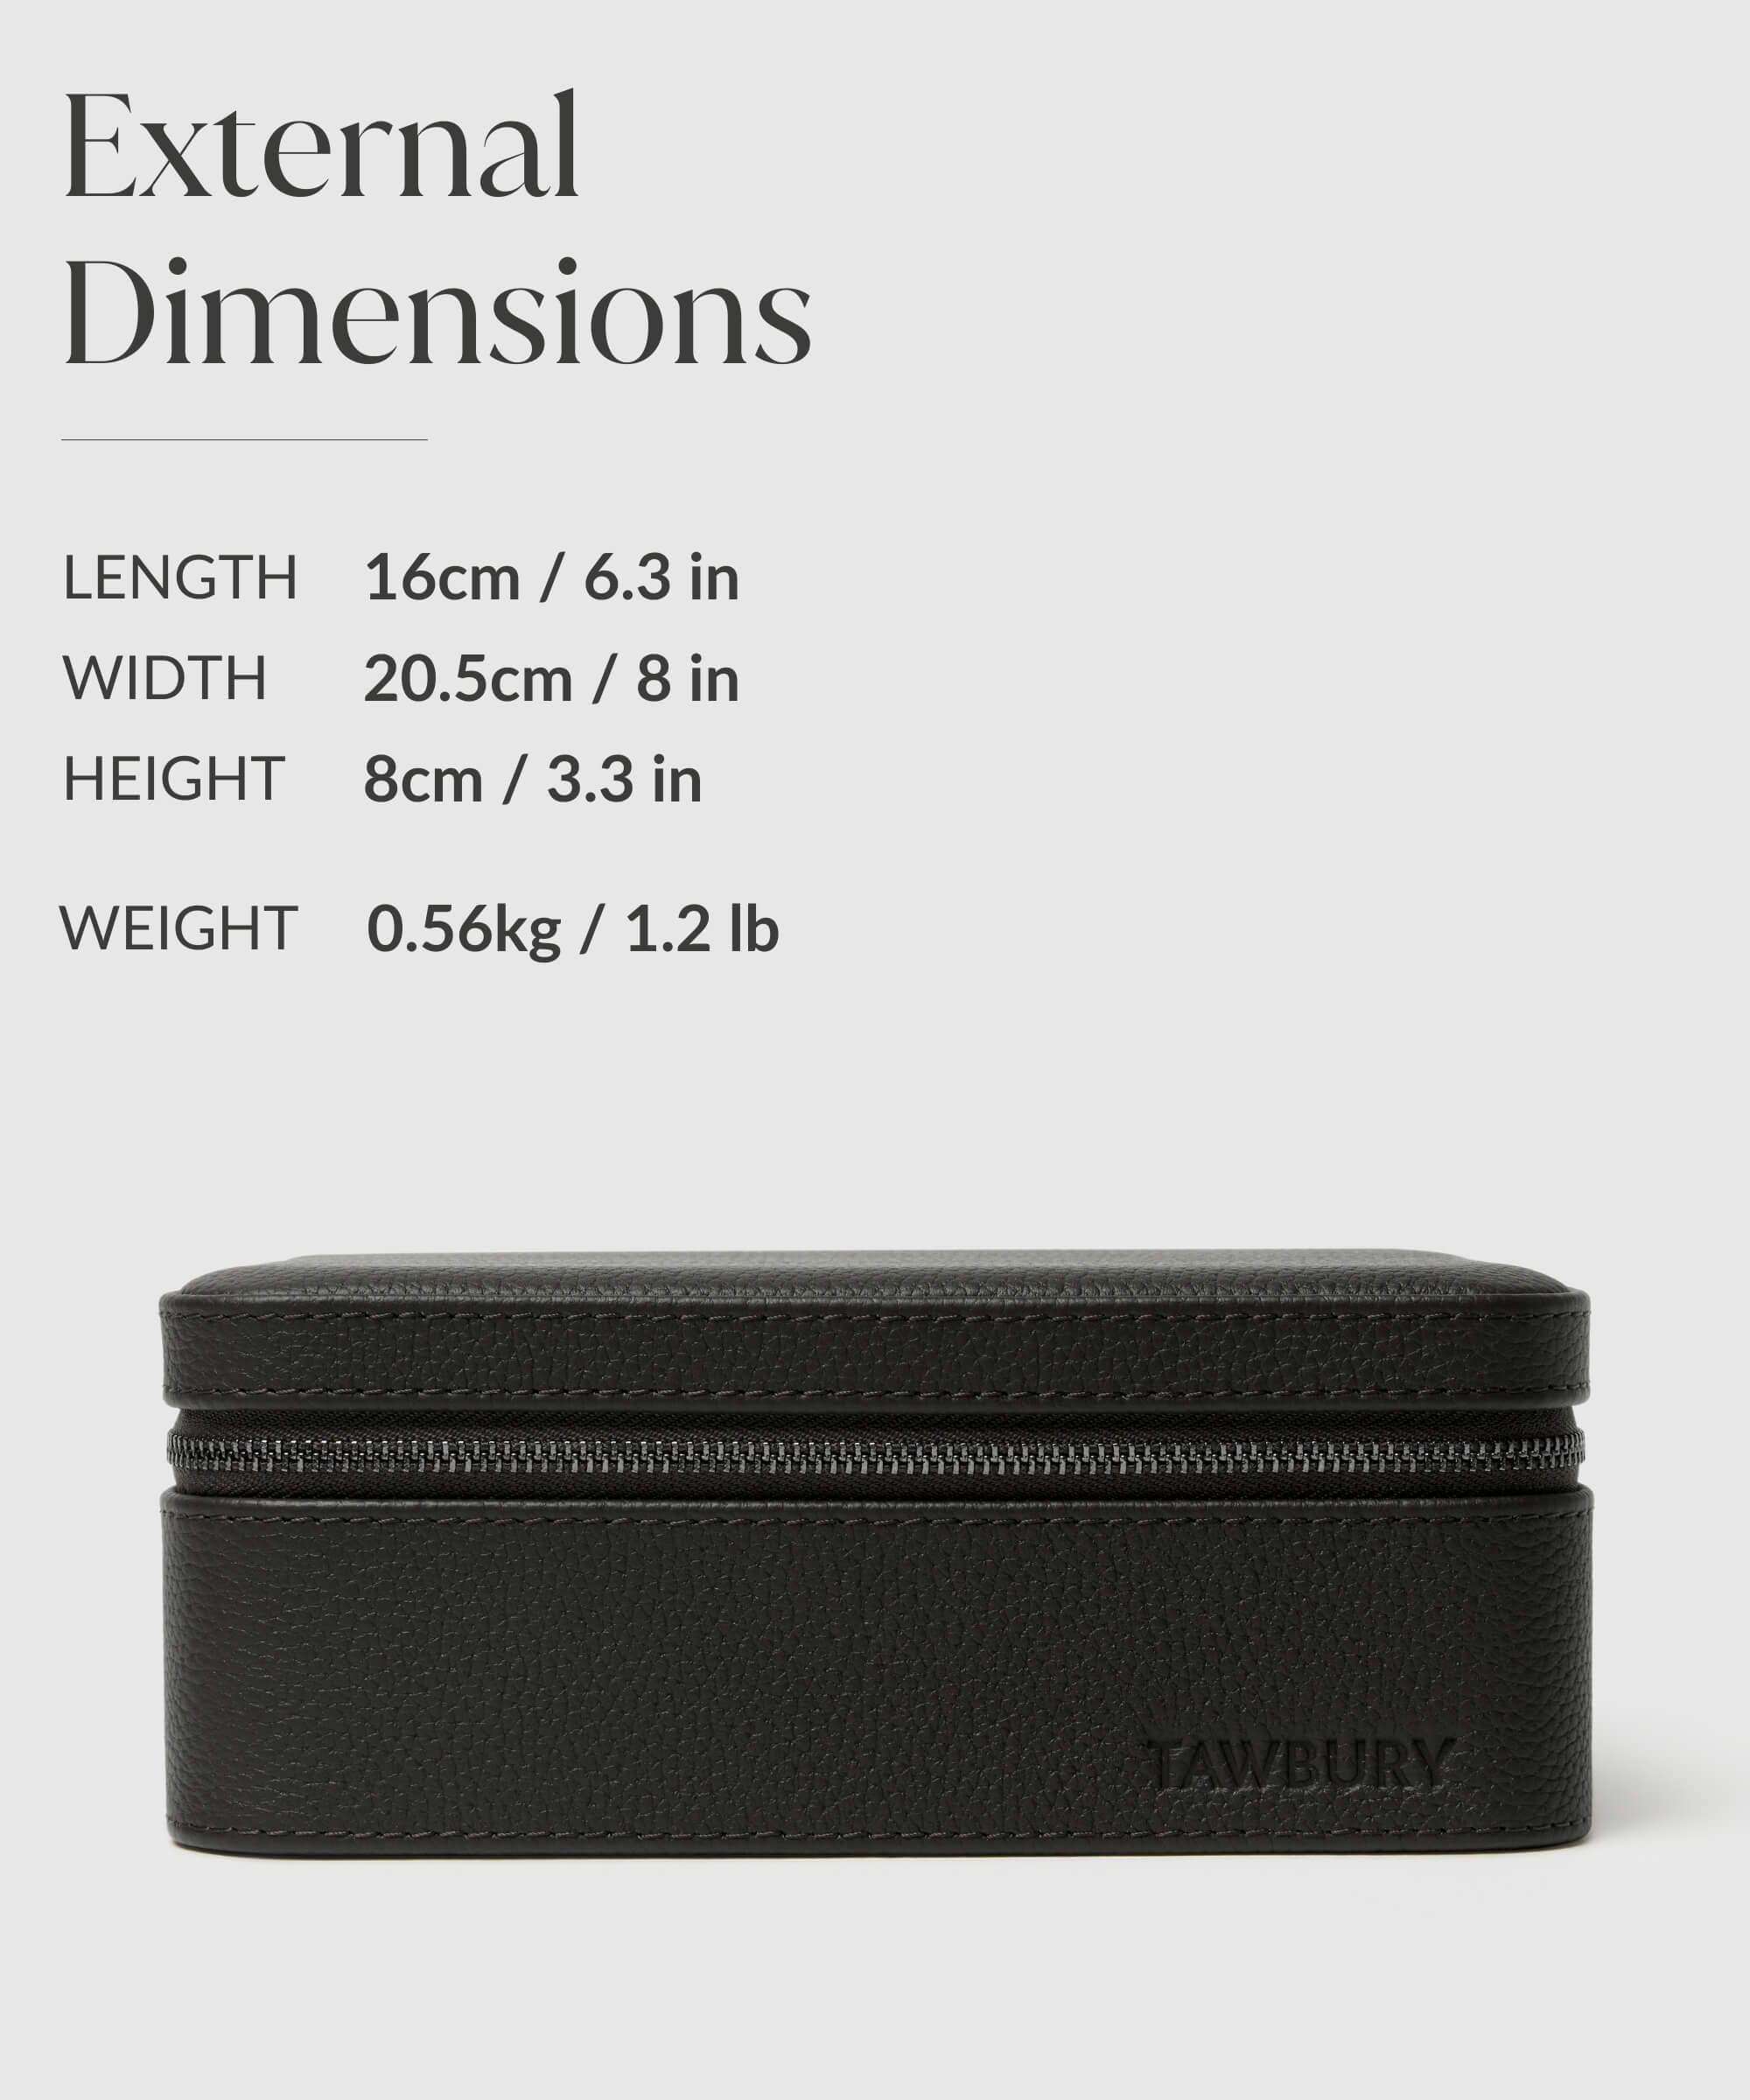 The external dimensions of a TAWBURY Fraser 3 Watch Travel Case with Storage - Black.